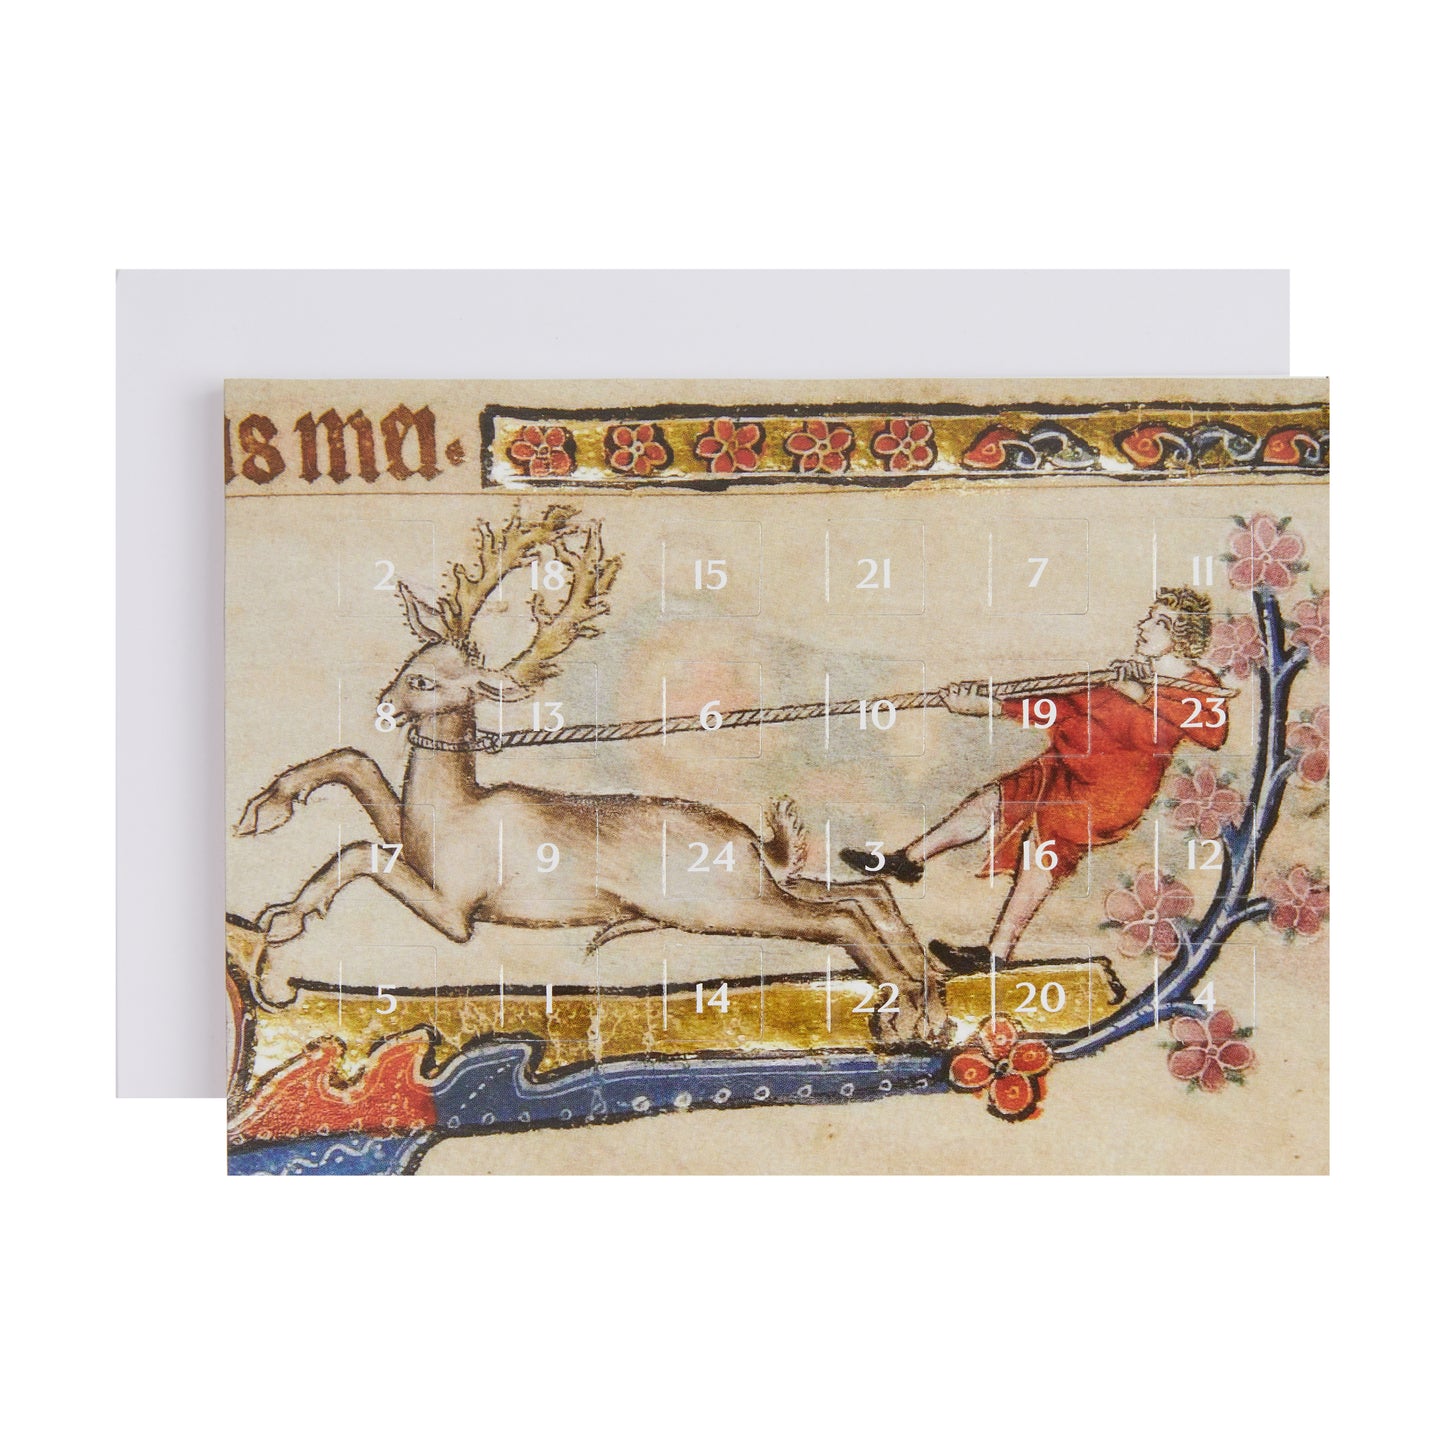 Advent card with envelope - stag and man from the Macclesfield Psalter. From the illuminated manuscript collection of the Fitzwilliam Museum.